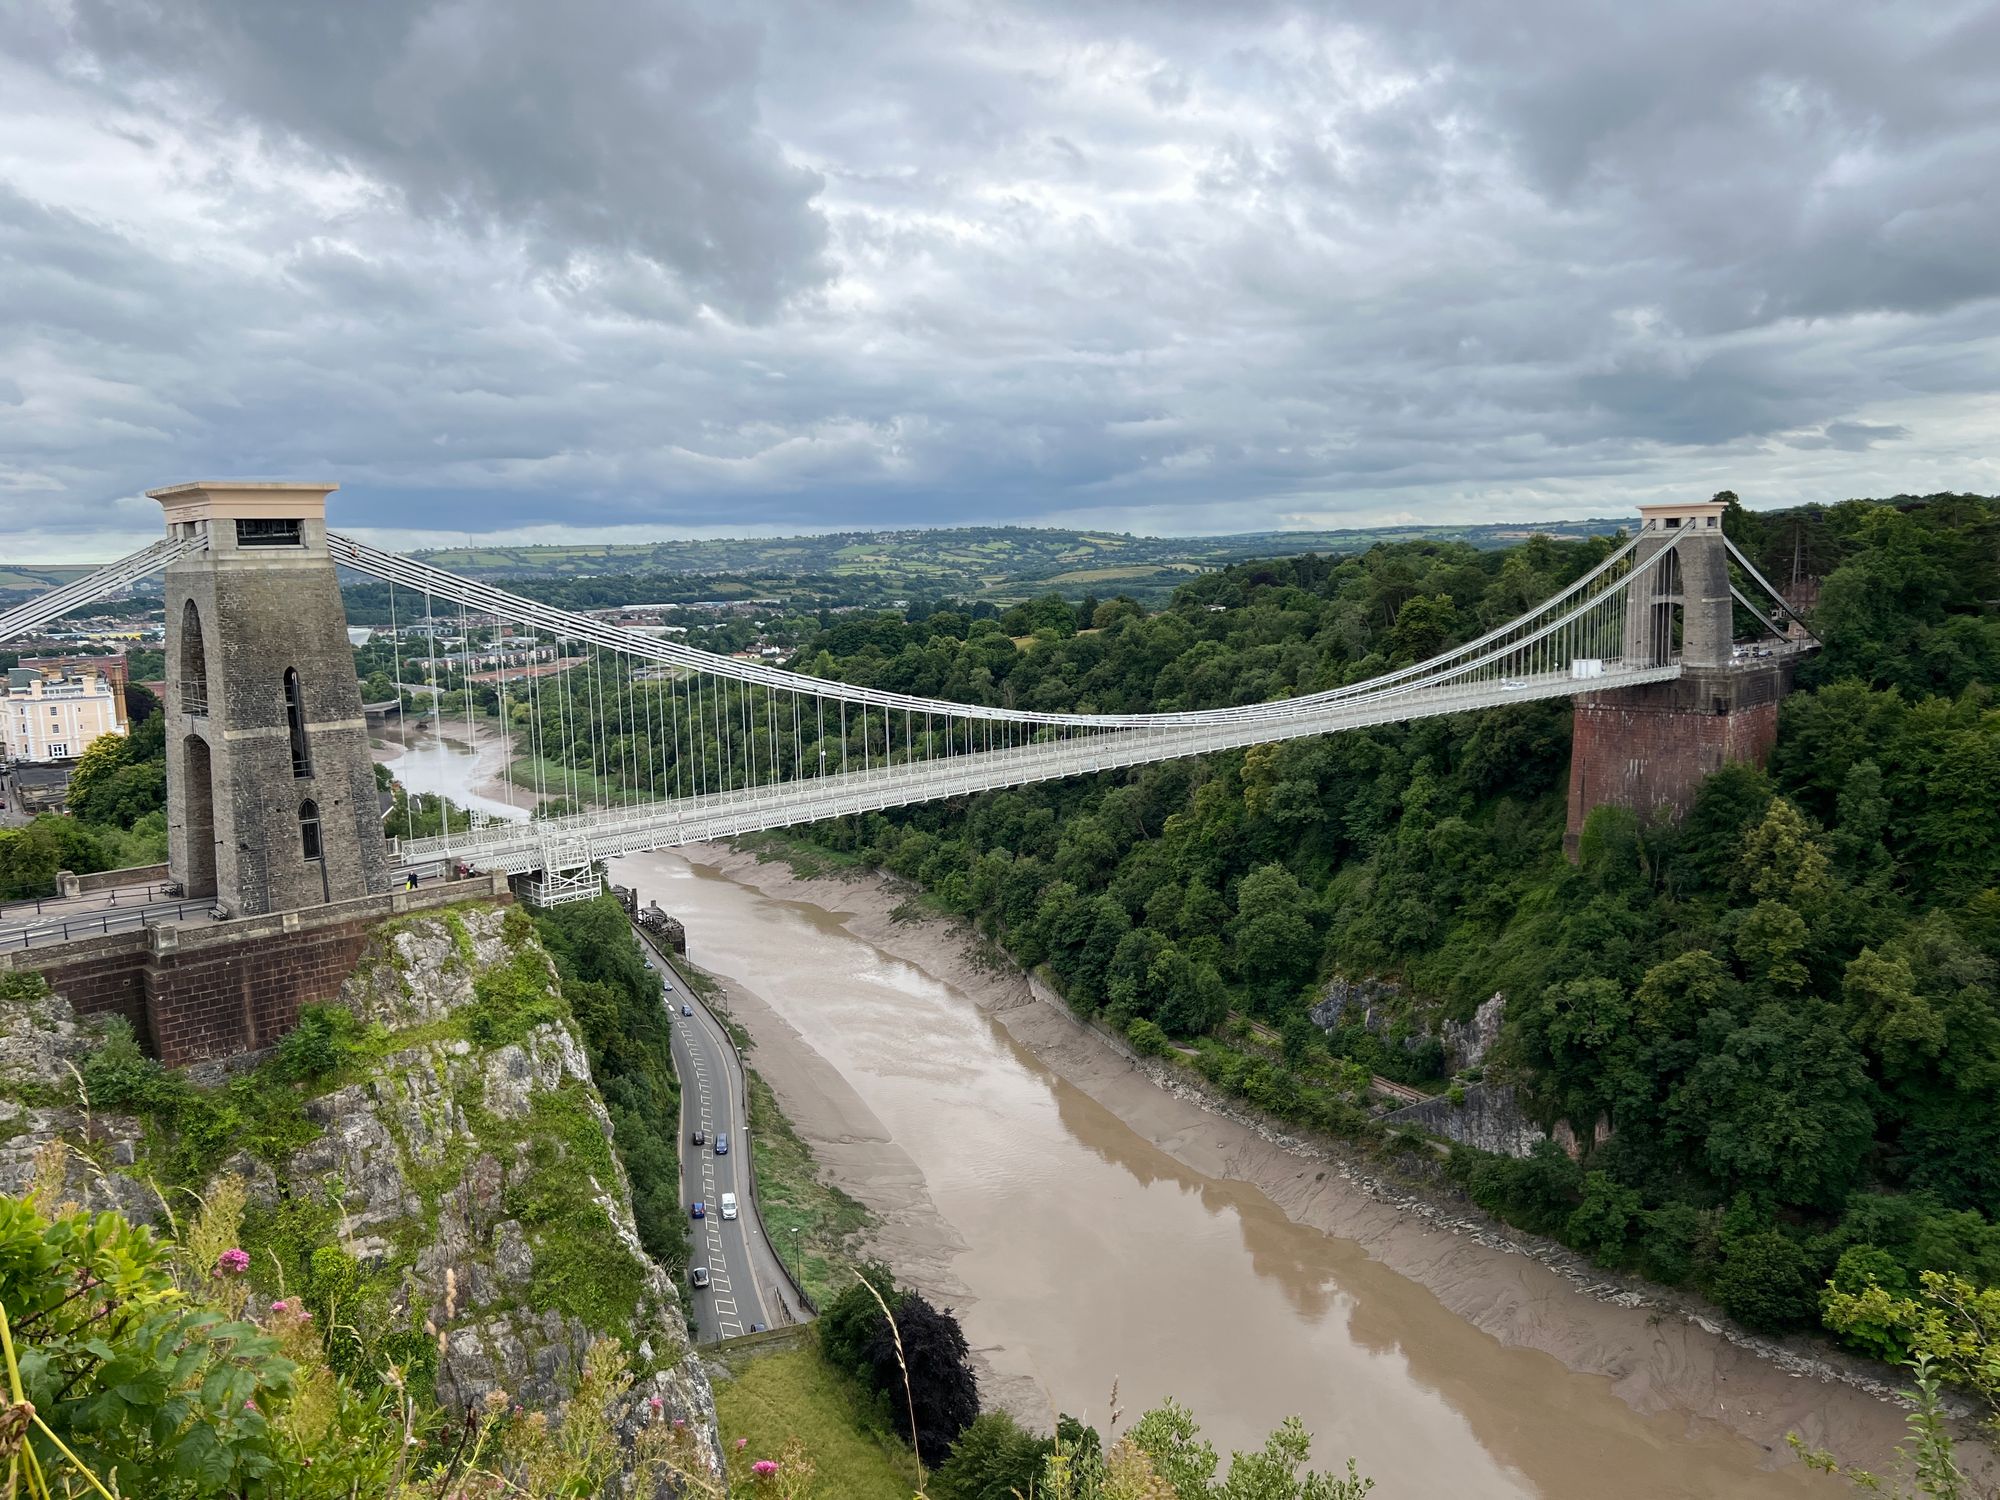 A suspension bridge with two brick towers across a wide gorge with the river tide coming in.